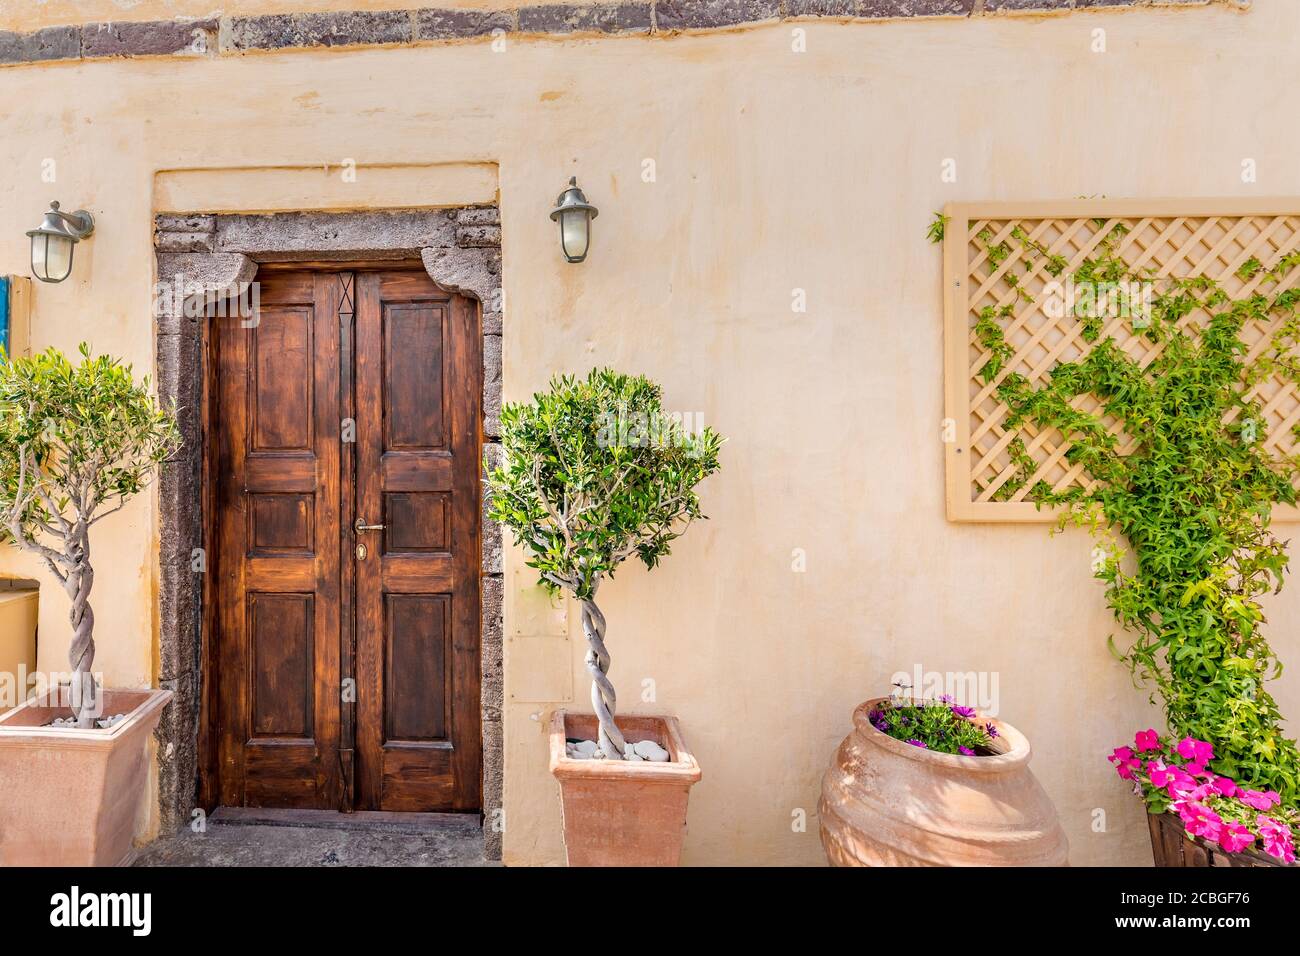 Old charming streets, south France, Provence. Old wooden door with bougainvillea flowers and green plants in ceramic vases Stock Photo